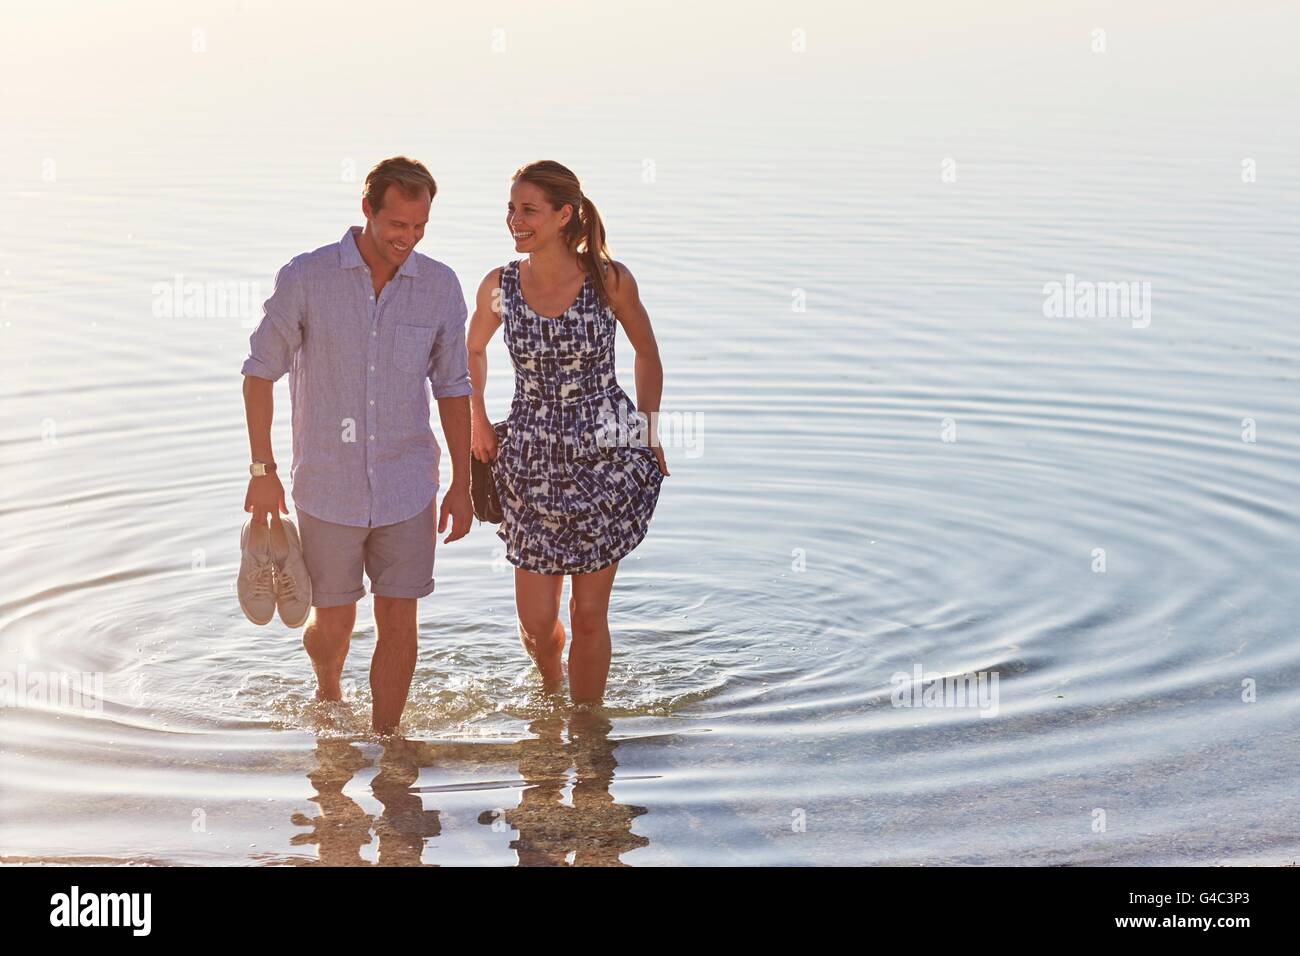 MODEL RELEASED. Couple paddling in the sea. Stock Photo